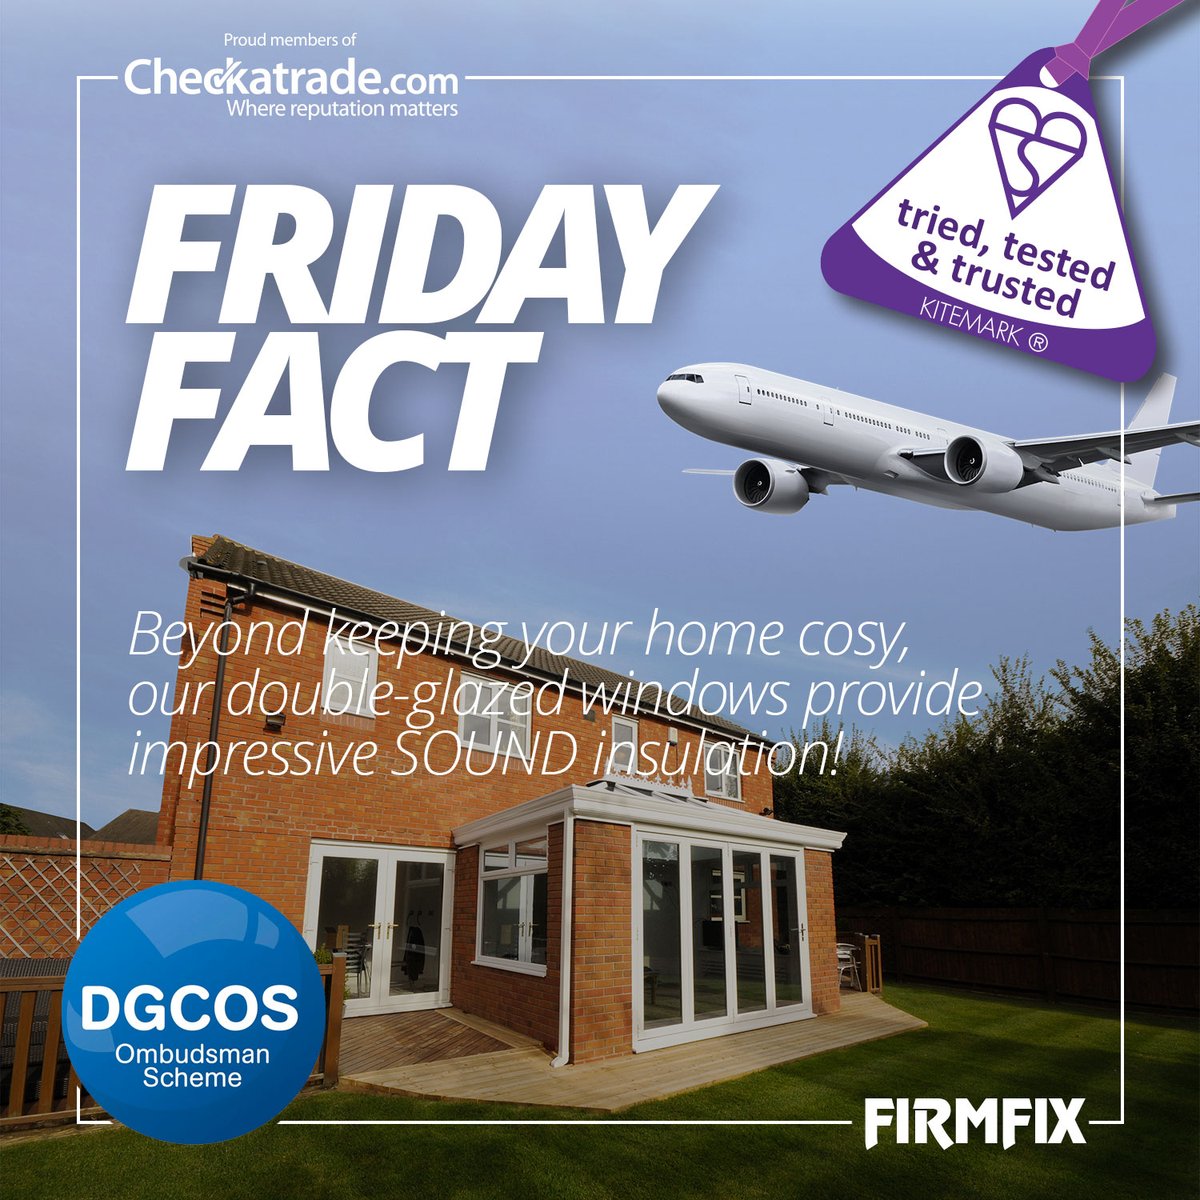 🎉 #FridayFact with Firmfix! 🎉

Did you know? 🤔 Our double-glazed windows offer exceptional SOUND insulation, creating a tranquil haven amidst the hustle and bustle. Experience quality, comfort, and serenity with Firmfix! 🏡🔇 #HomeComfort #PeacefulLiving 🌟